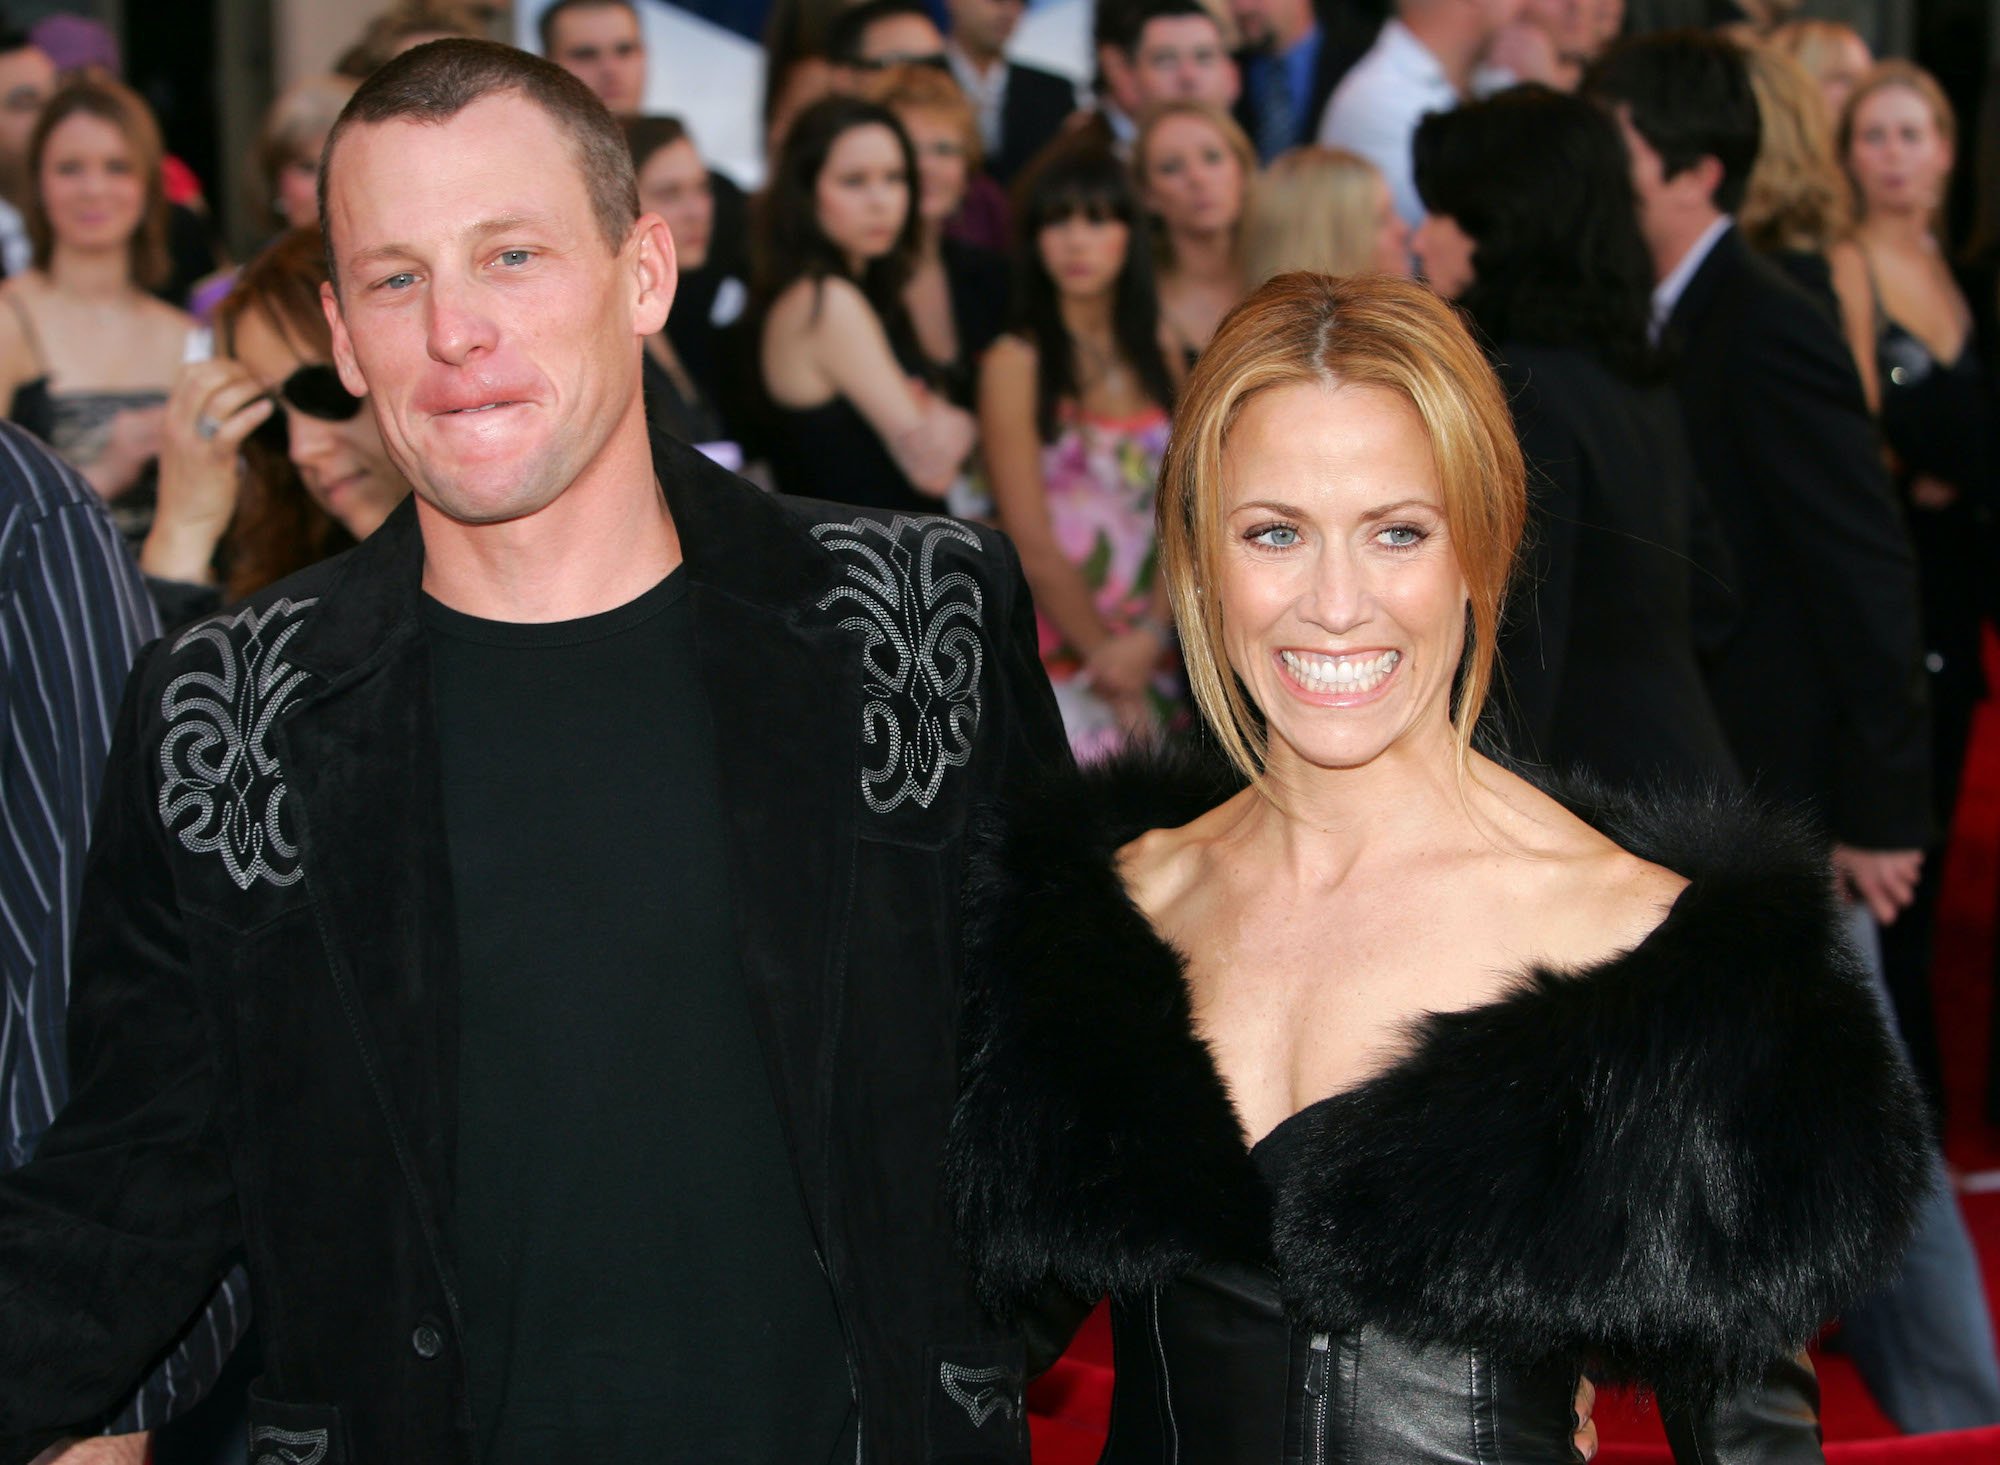 (L-R) Lance Armstrong and Sheryl Crow smiling walking on a red carpet